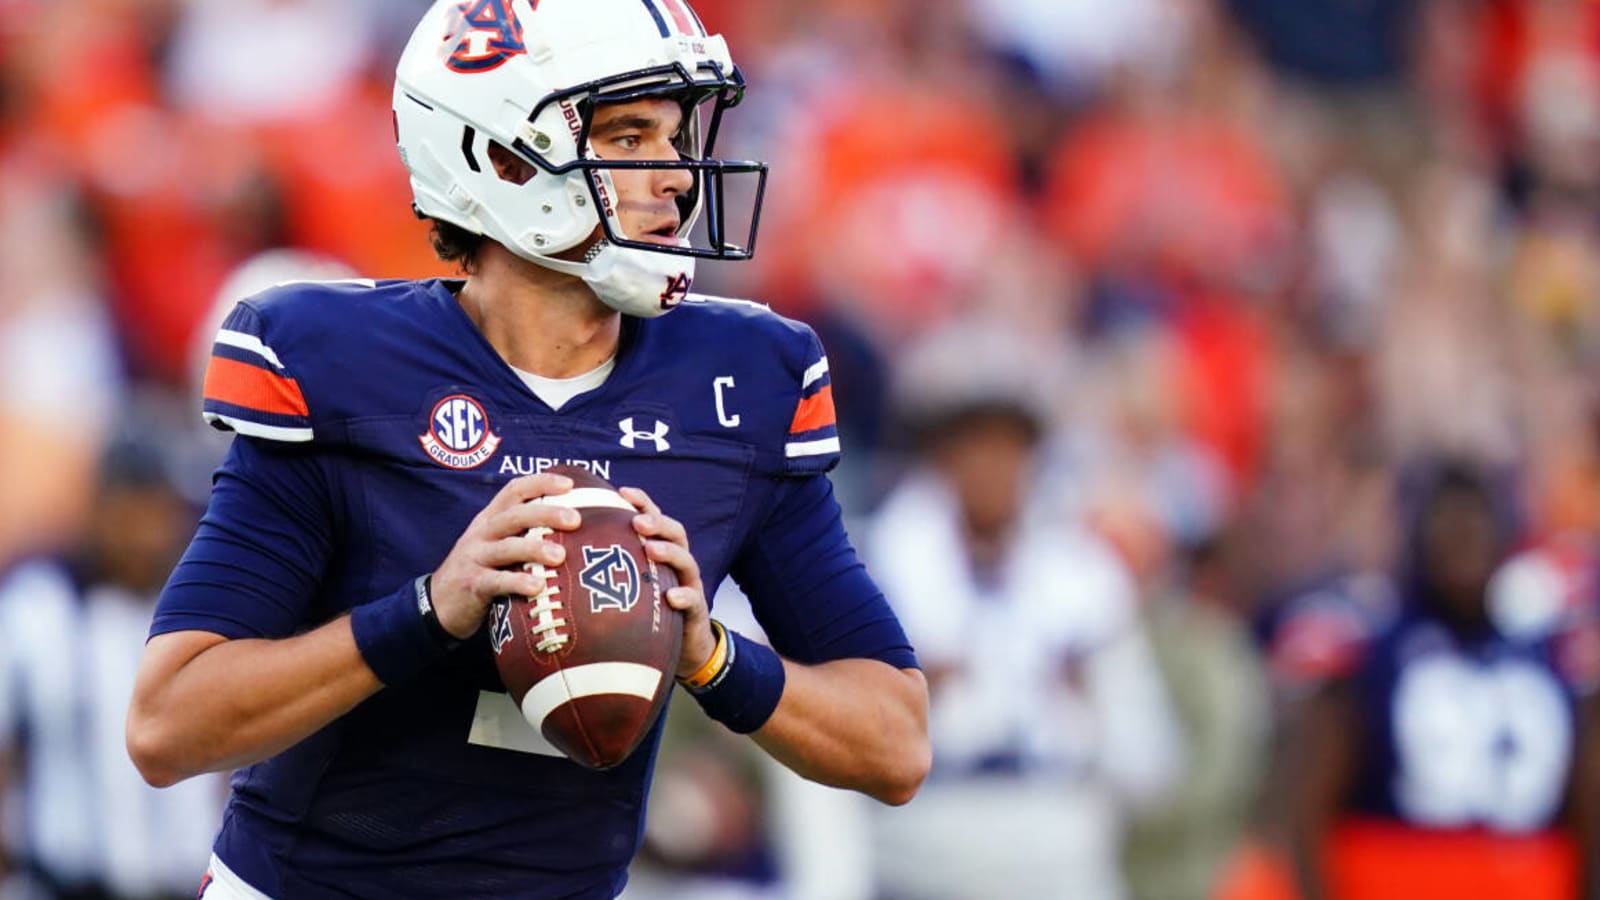 Auburn Daily Roundtable: Tigers Entering Final Tune-up vs NMSU Before Iron Bowl